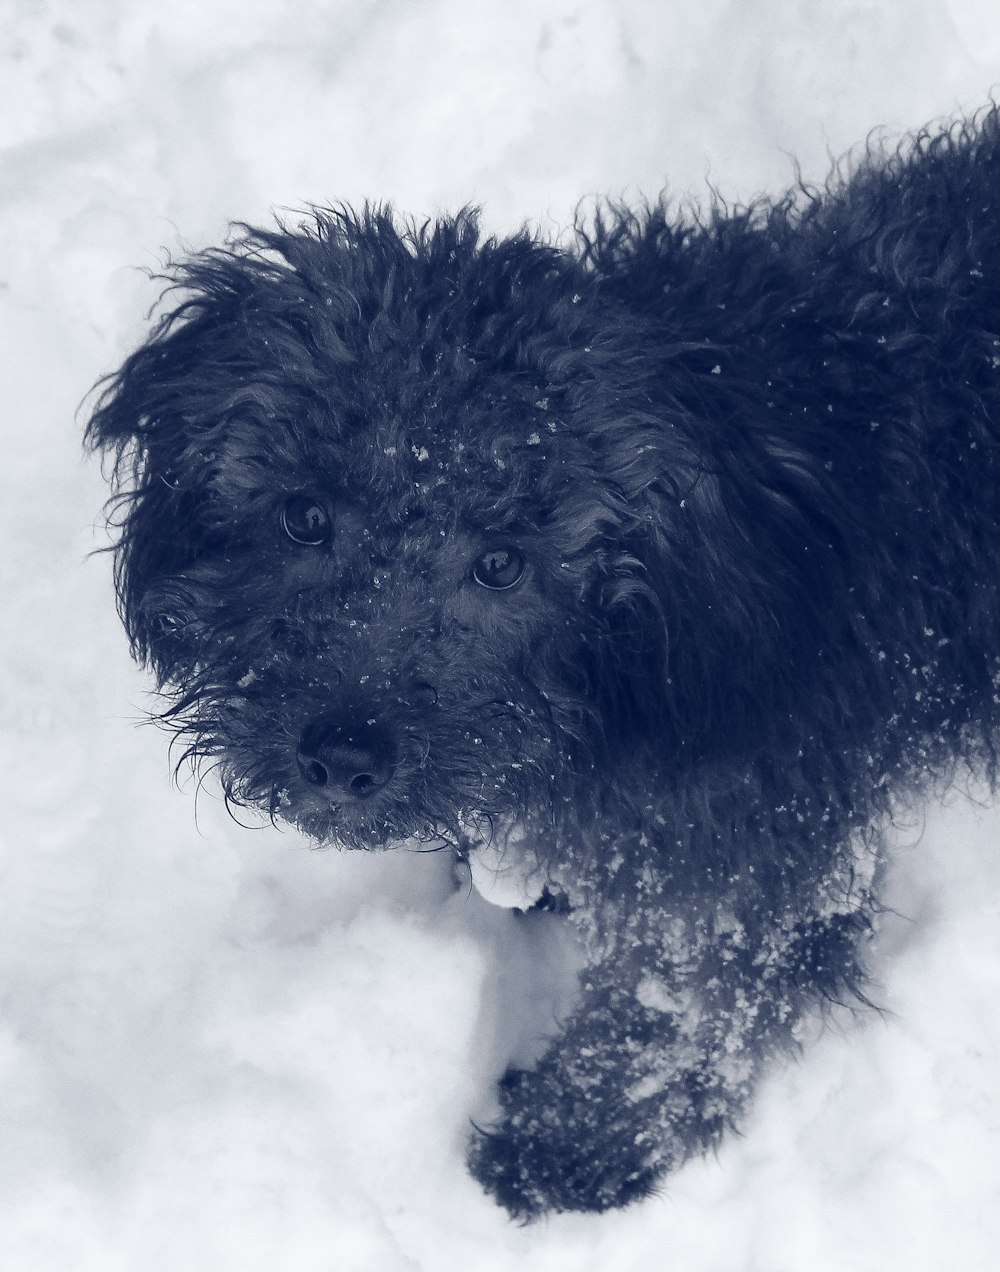 black long coat small dog on snow covered ground